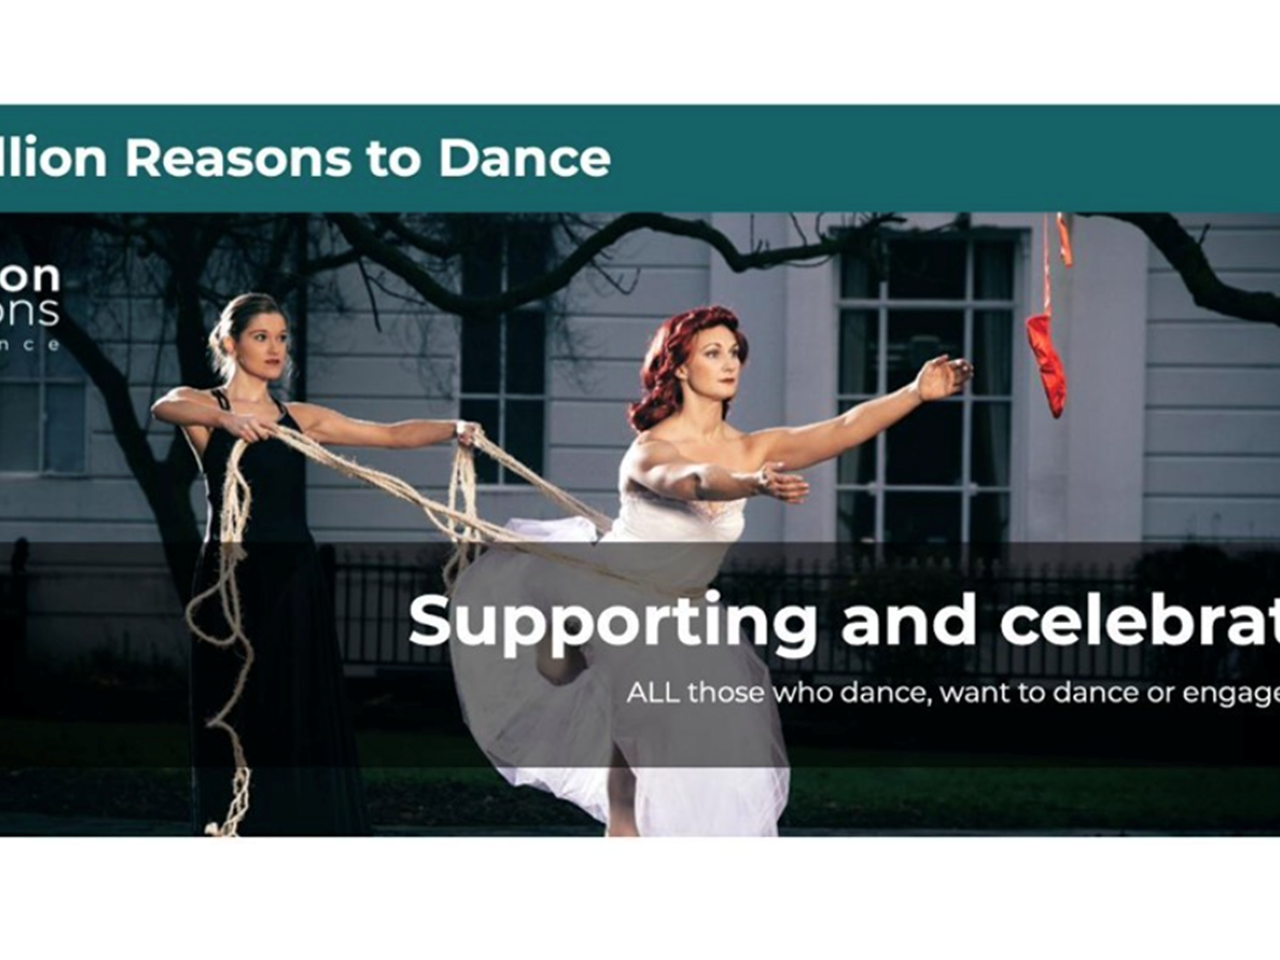 11 Million Reasons to Dance Network